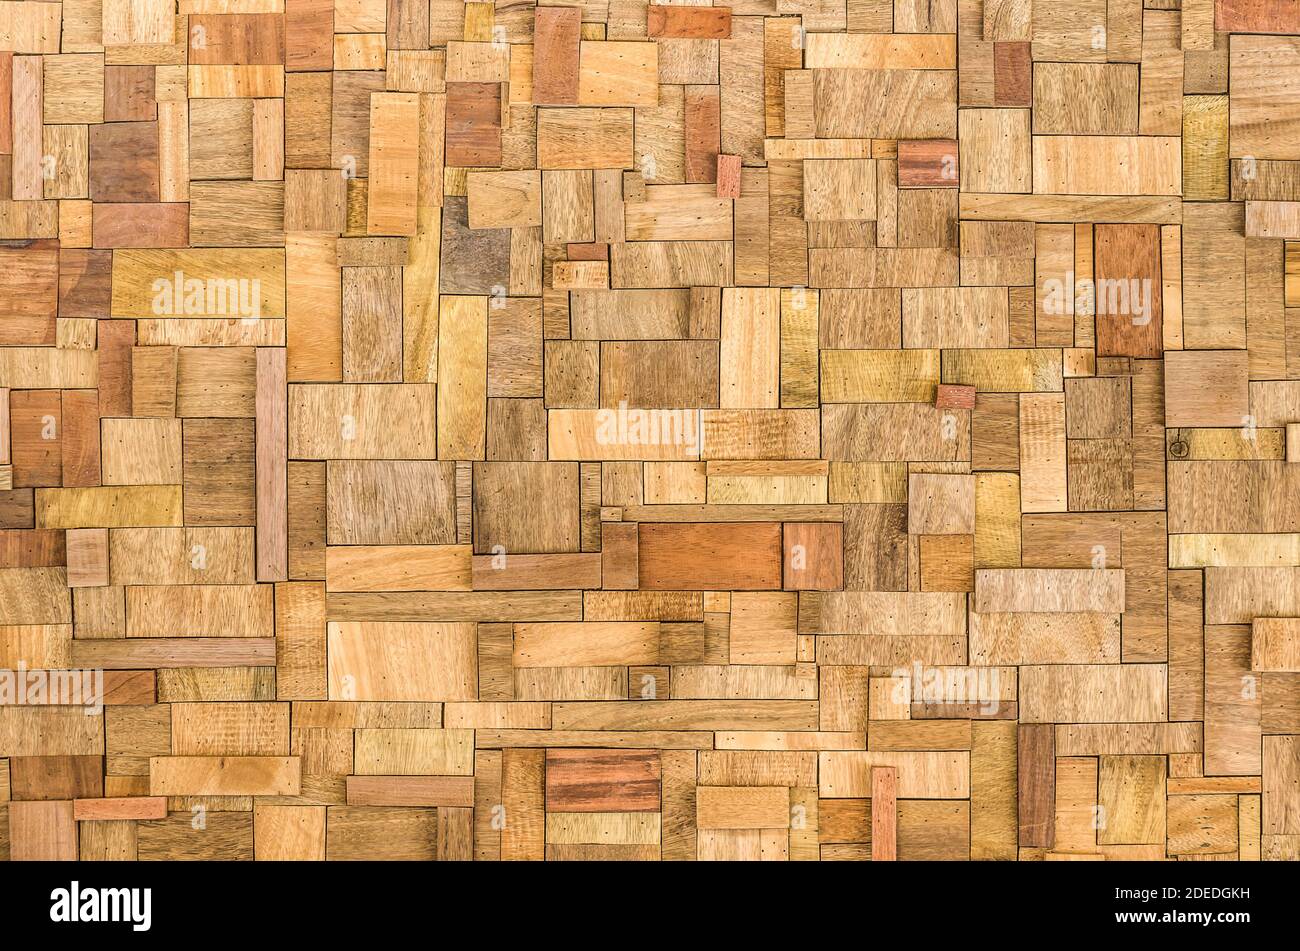 Wood texture - Ecological background concept with blocks of wooden material Stock Photo